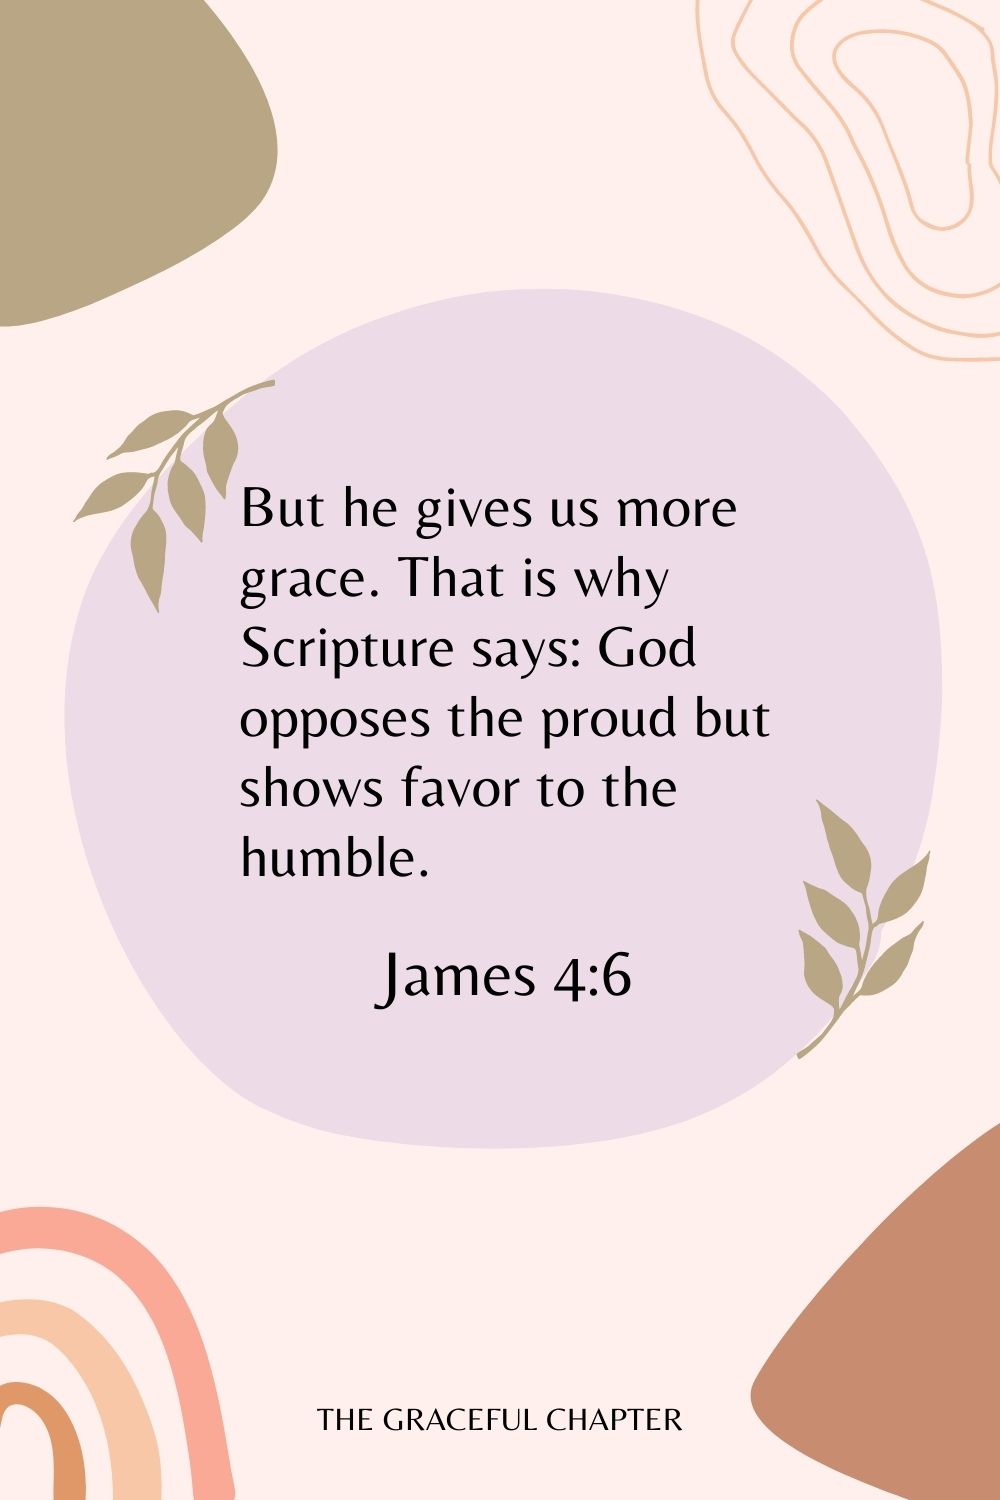 But he gives us more grace. That is why Scripture says: God opposes the proud but shows favor to the humble. James 4:6